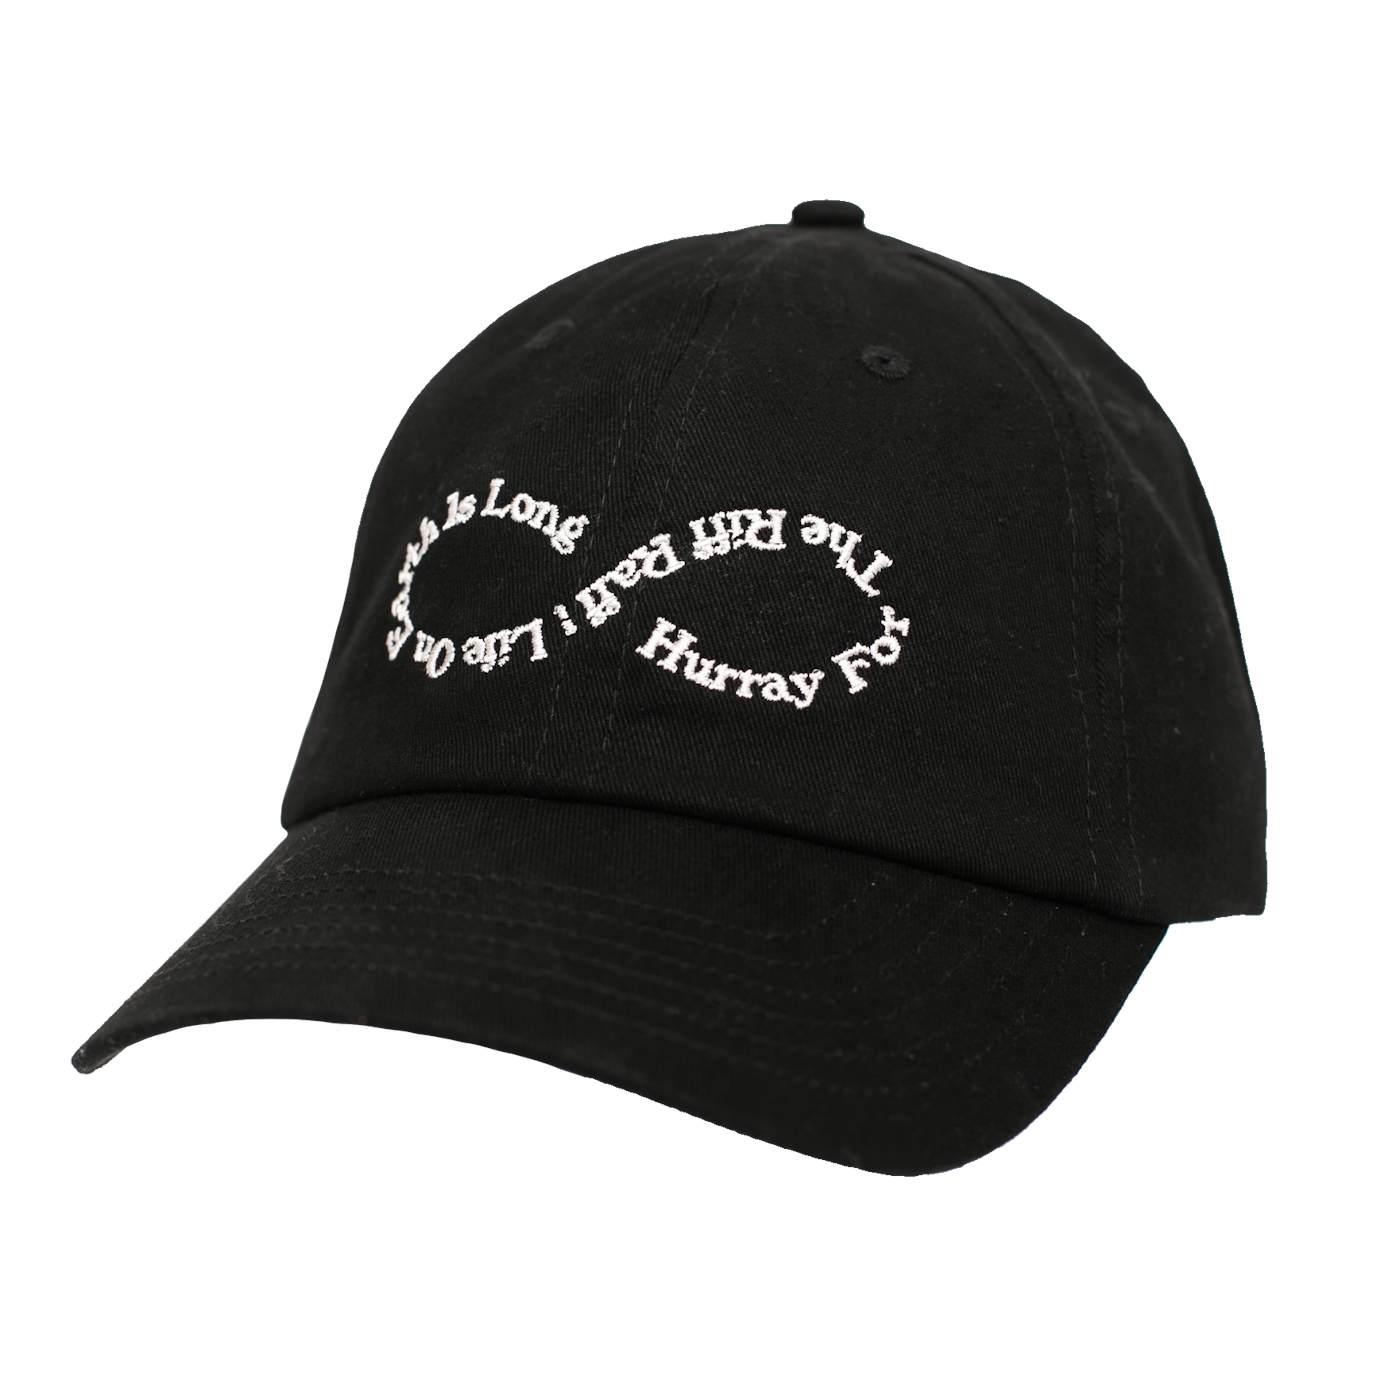 Hurray For The Riff Raff | Infinity Dad Hat